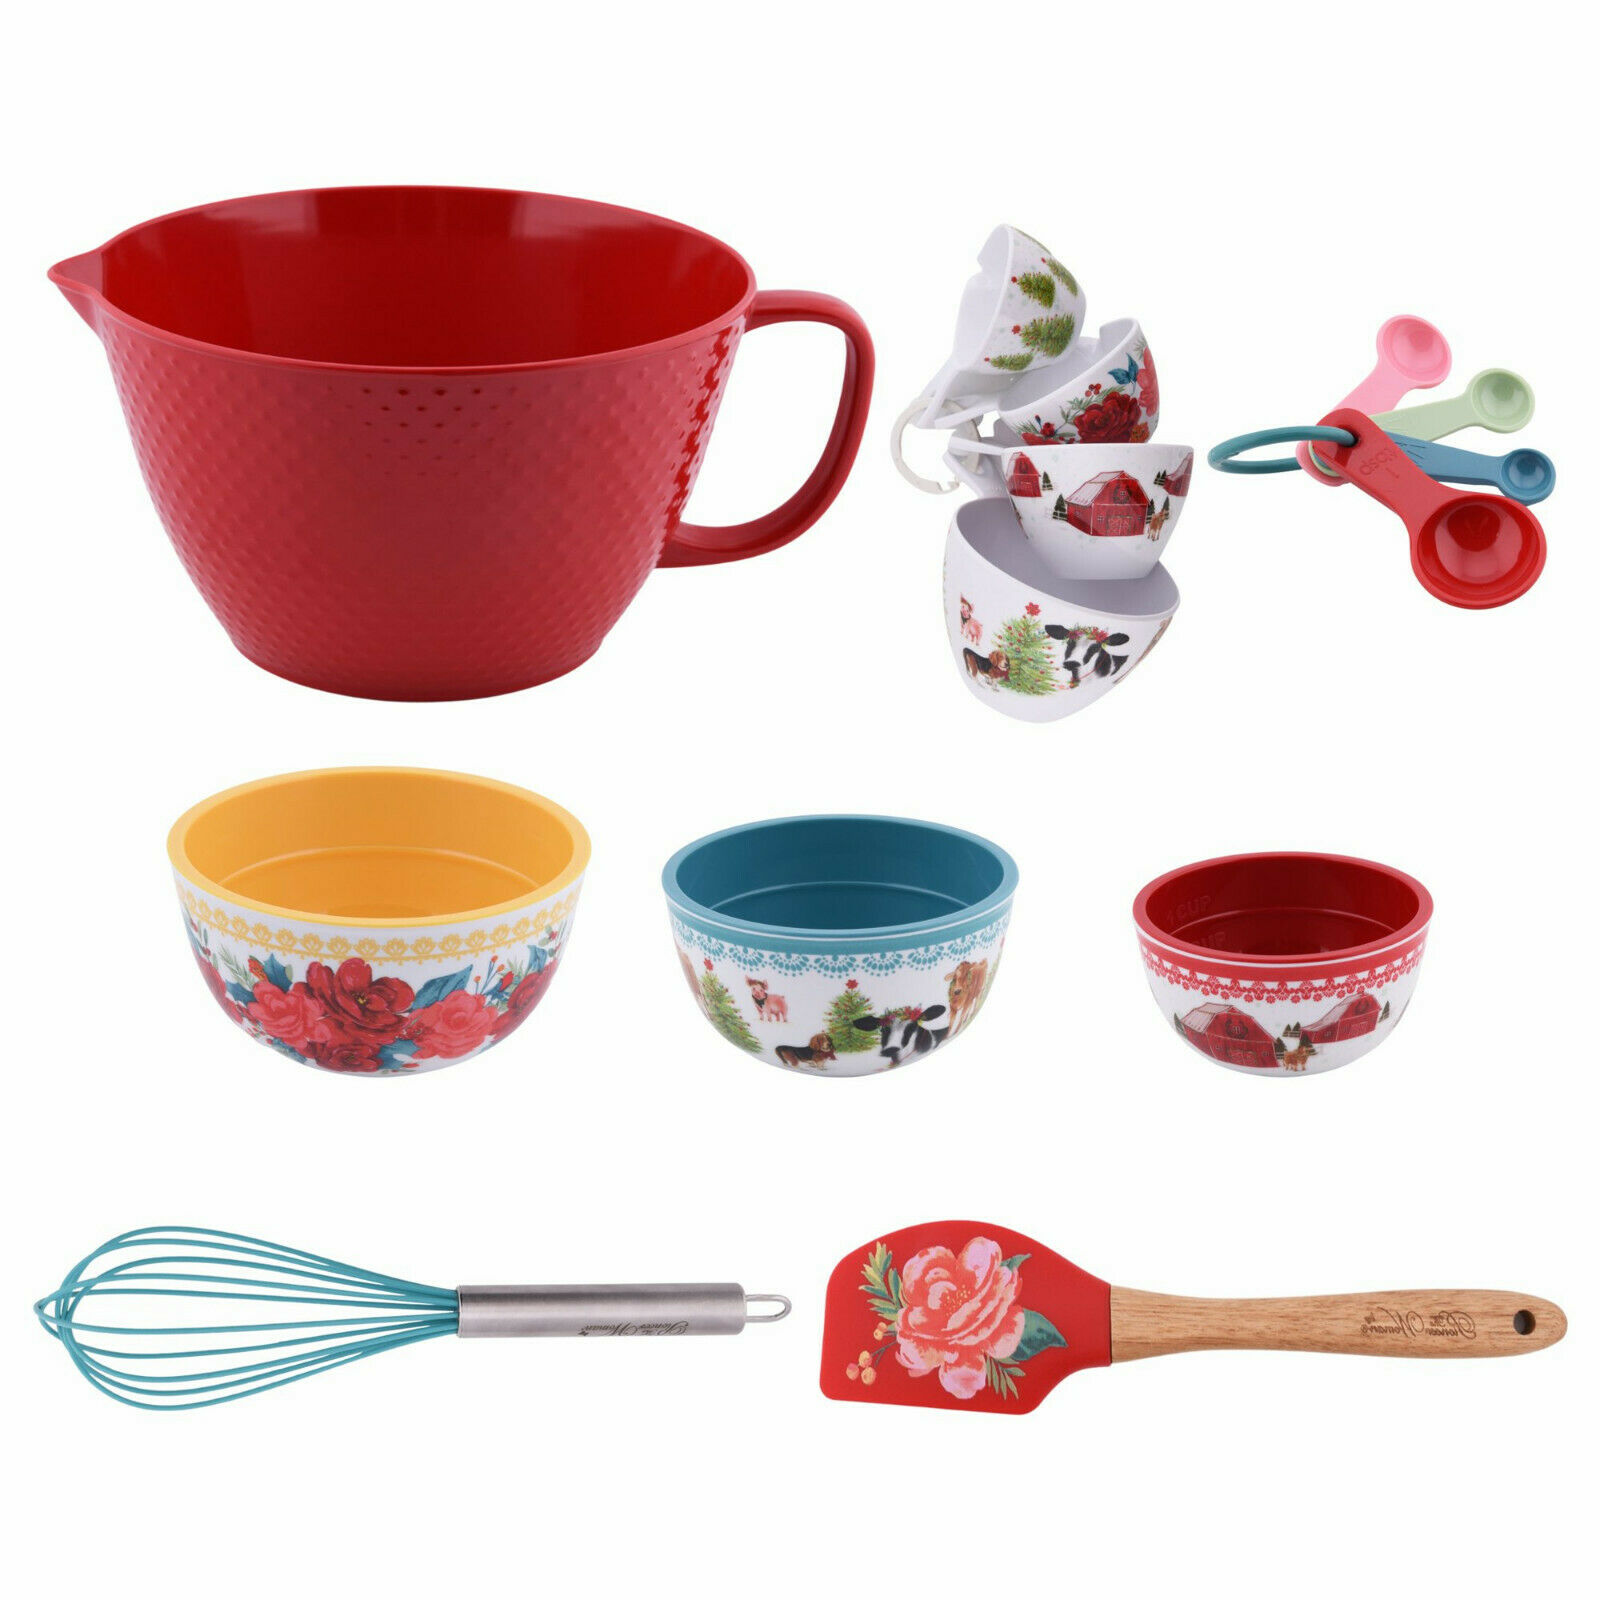 The Pioneer Woman Cheerful Rose Christmas Floral Melamine 14 Piece Baking Set